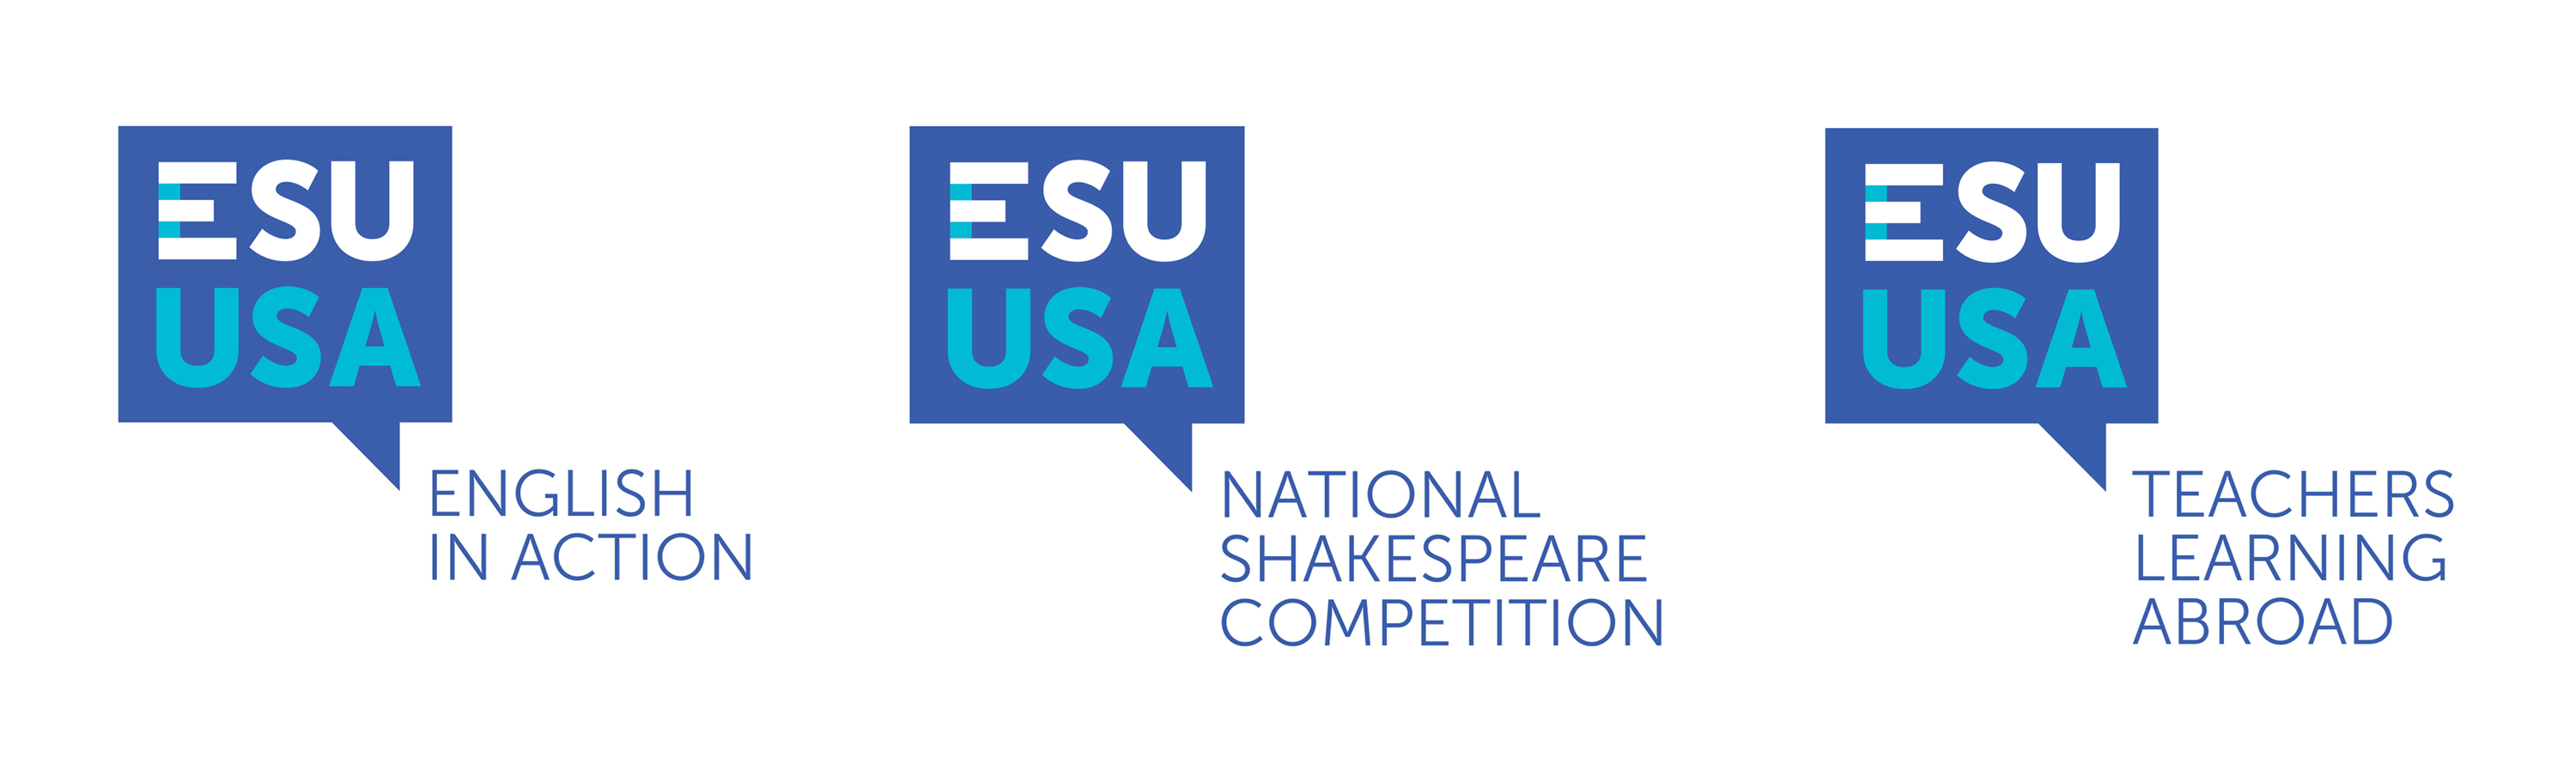 Designs of the ESU Program Logos: English in Action, National Shakespeare Competition and Teachers Learning Abroad 